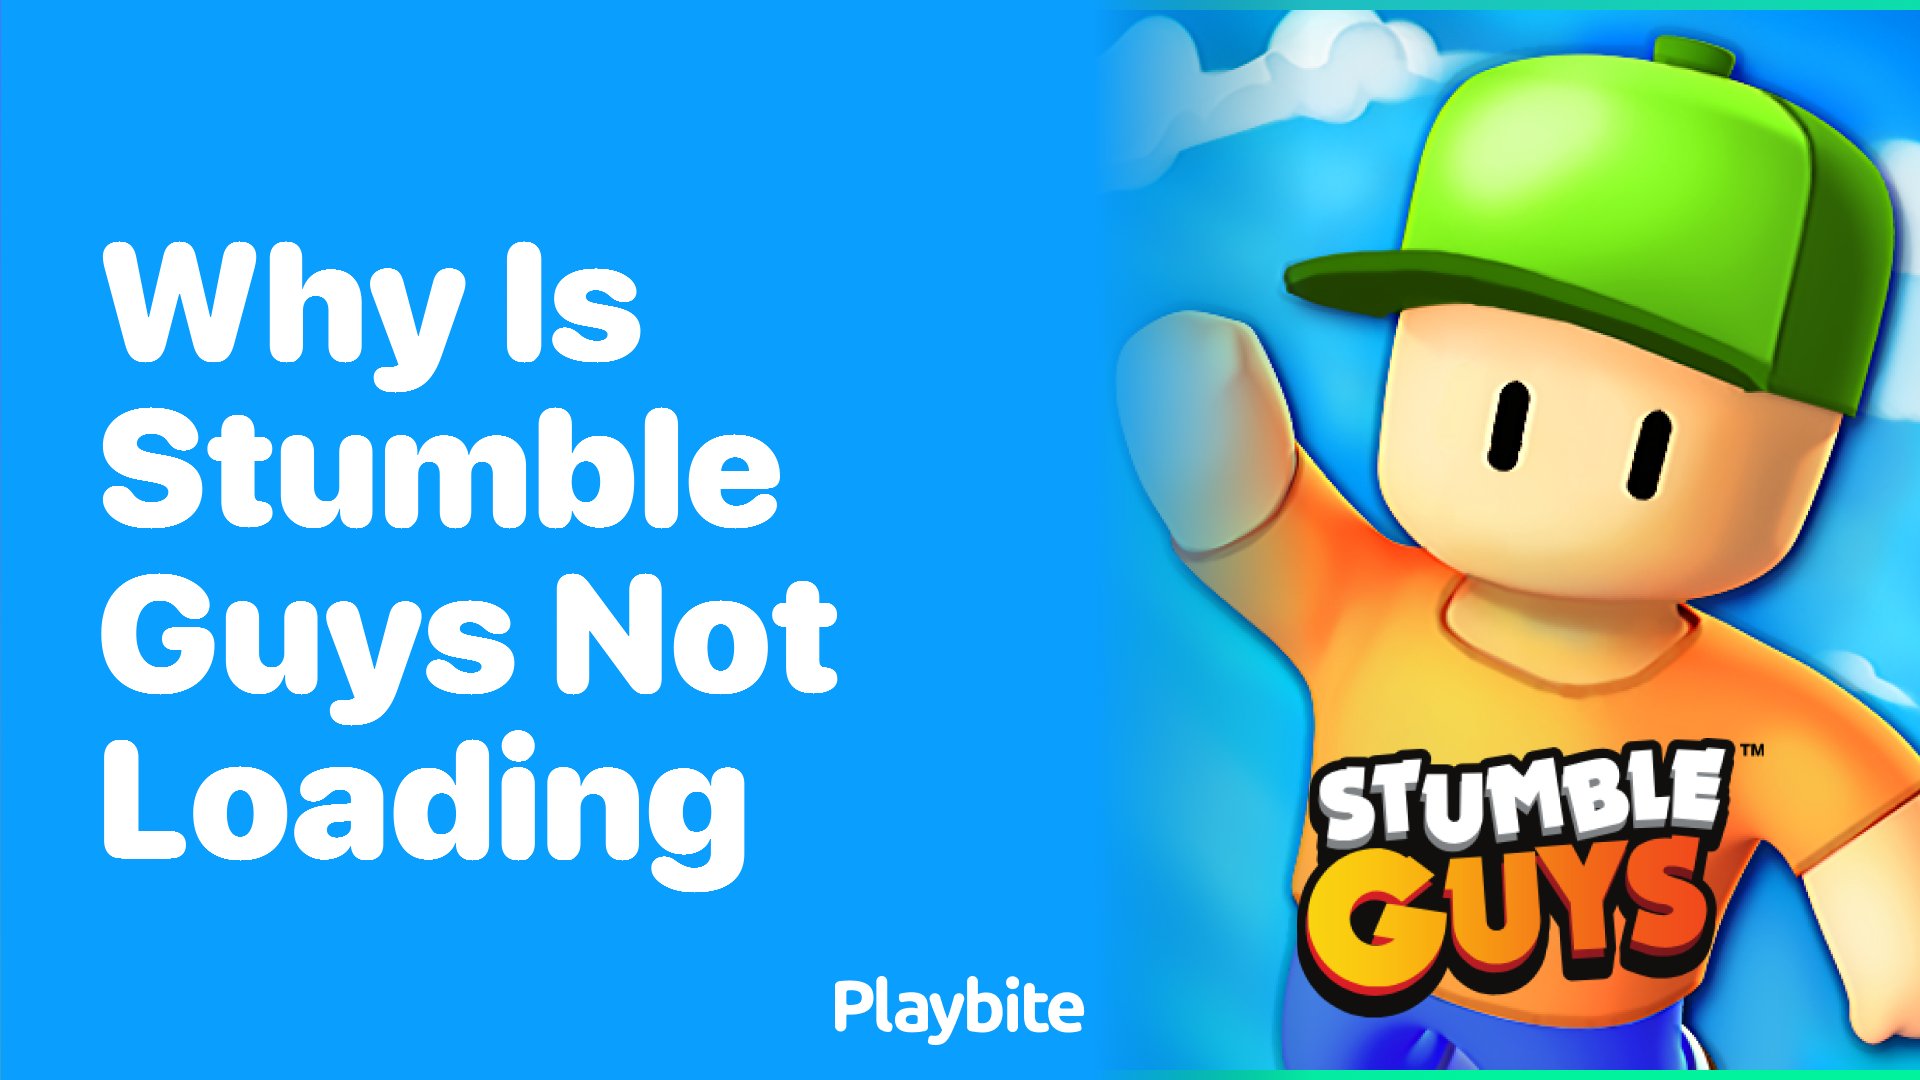 Why Is Stumble Guys Not Loading? Let&#8217;s Find Out!